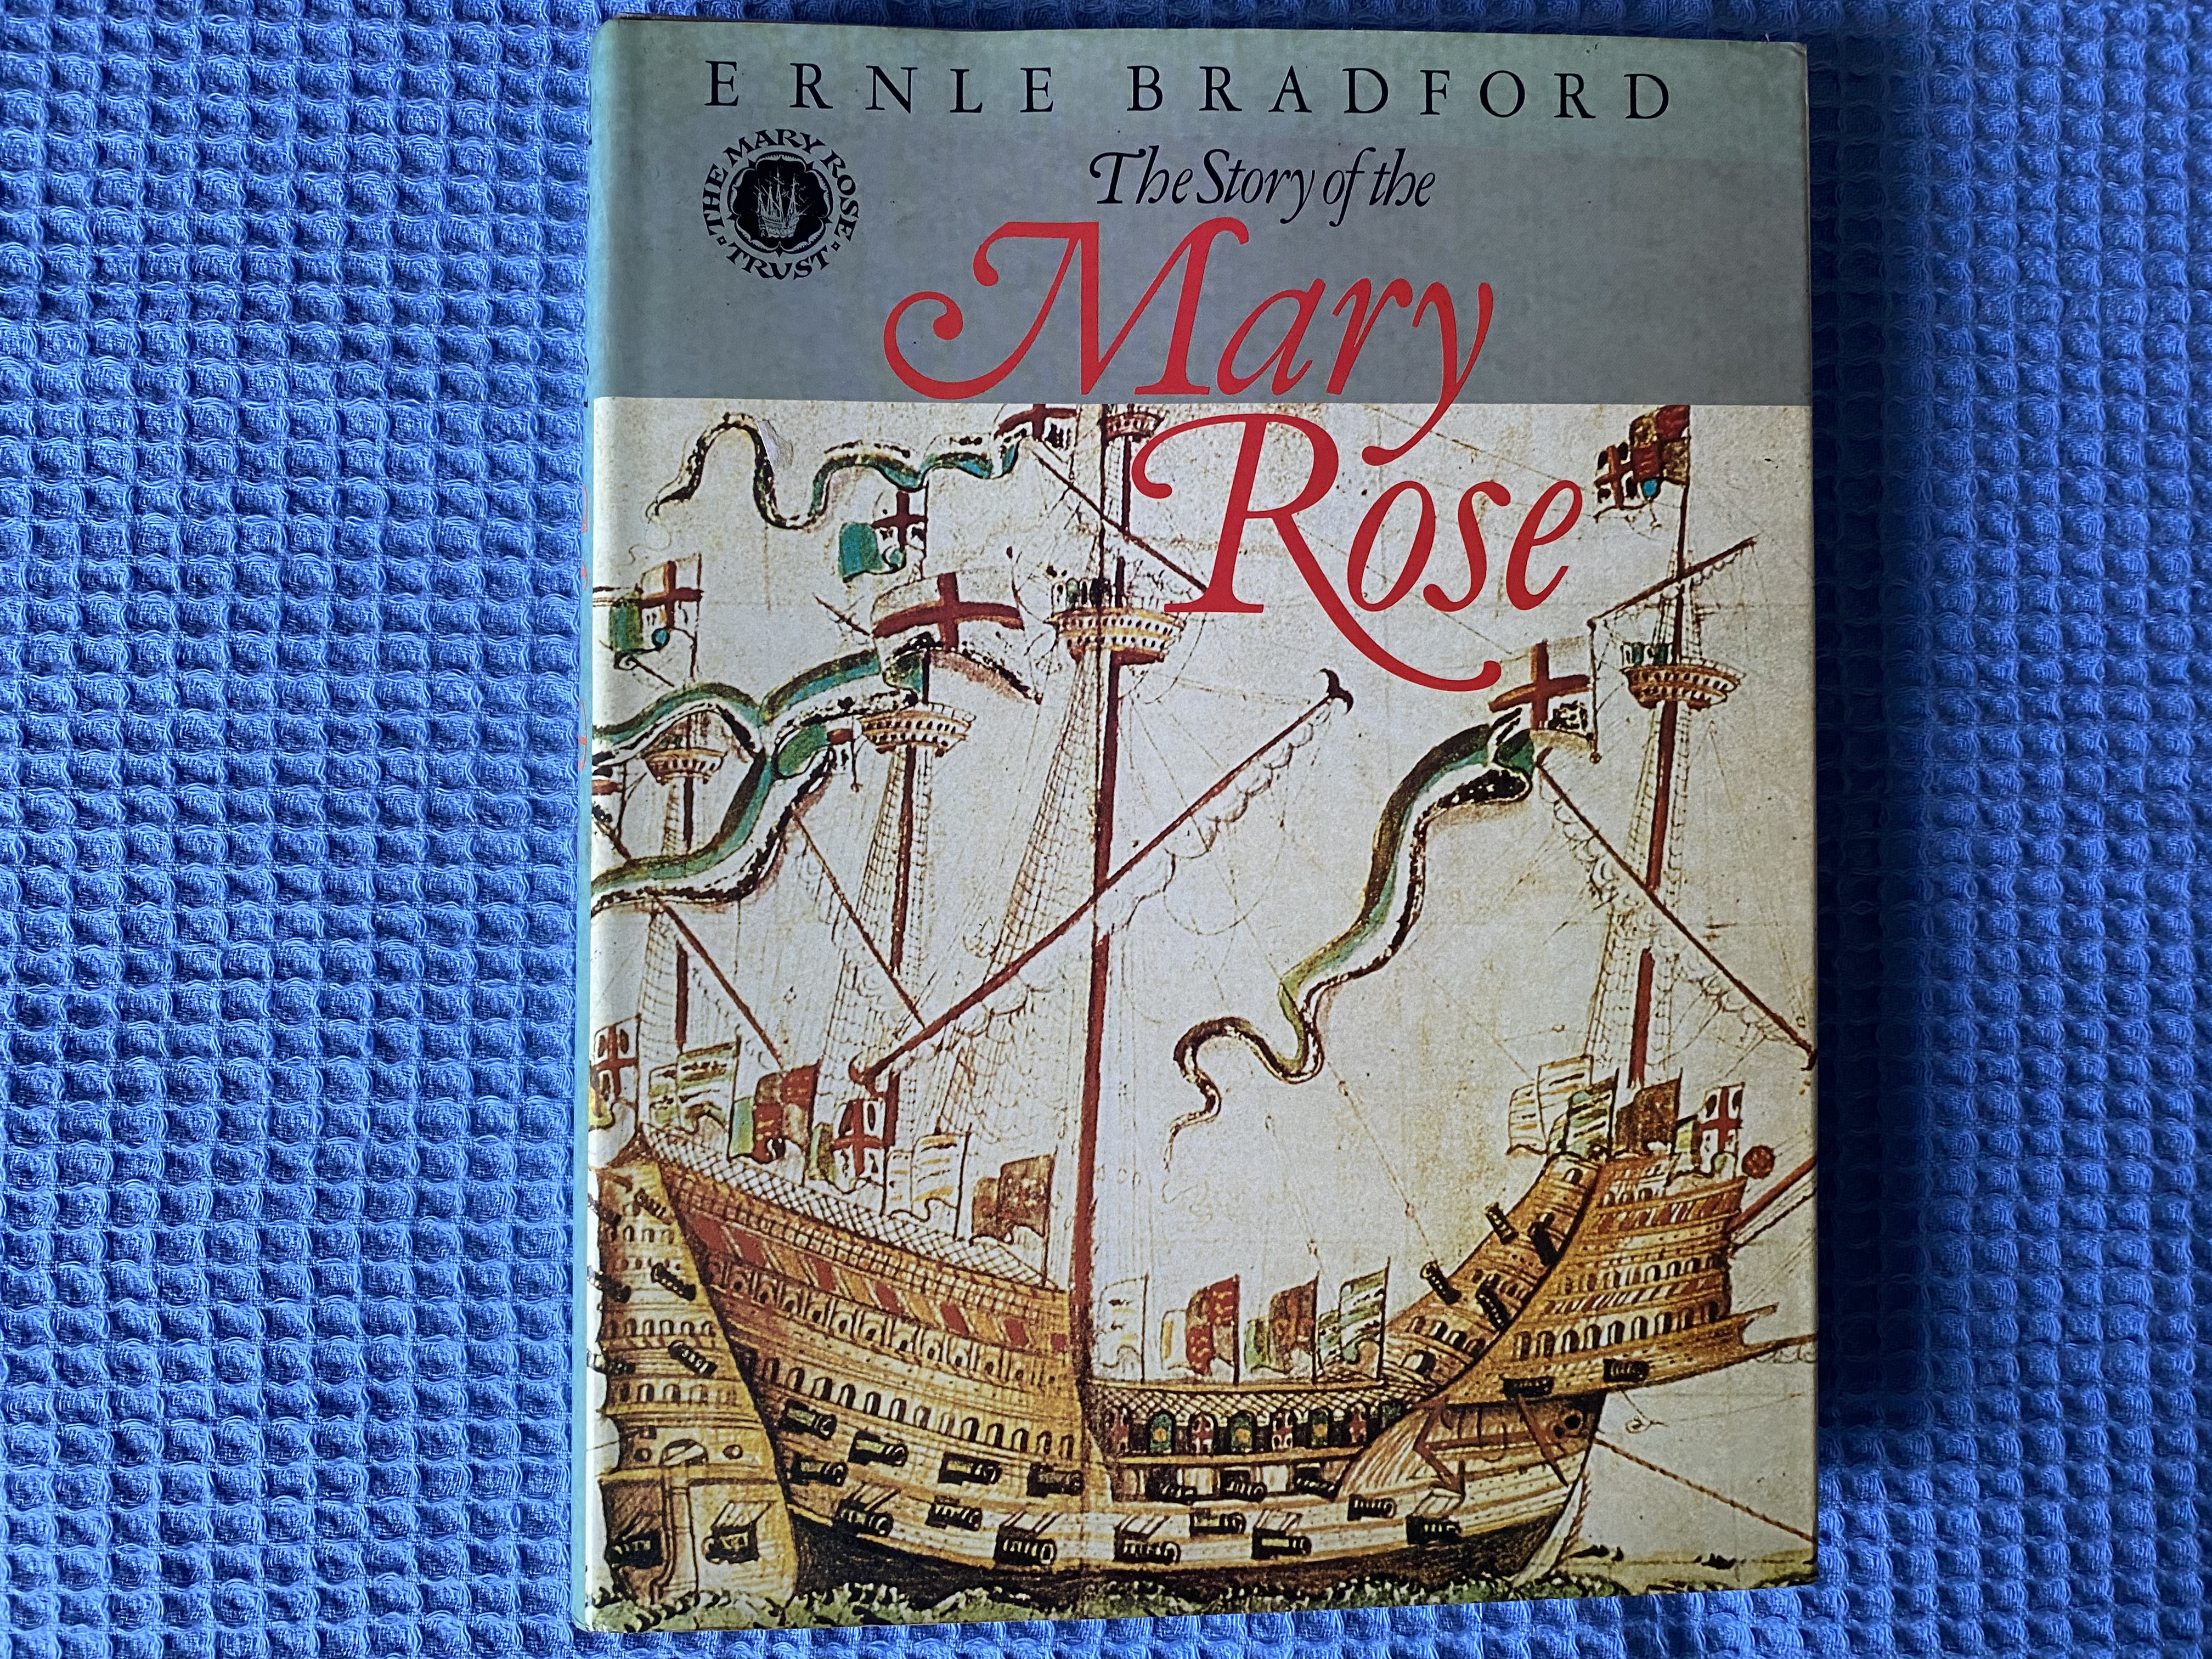 FAMOUS BOOK BY ERNLE BRADFORD ENTITLED THE STORY OF THE MARY ROSE